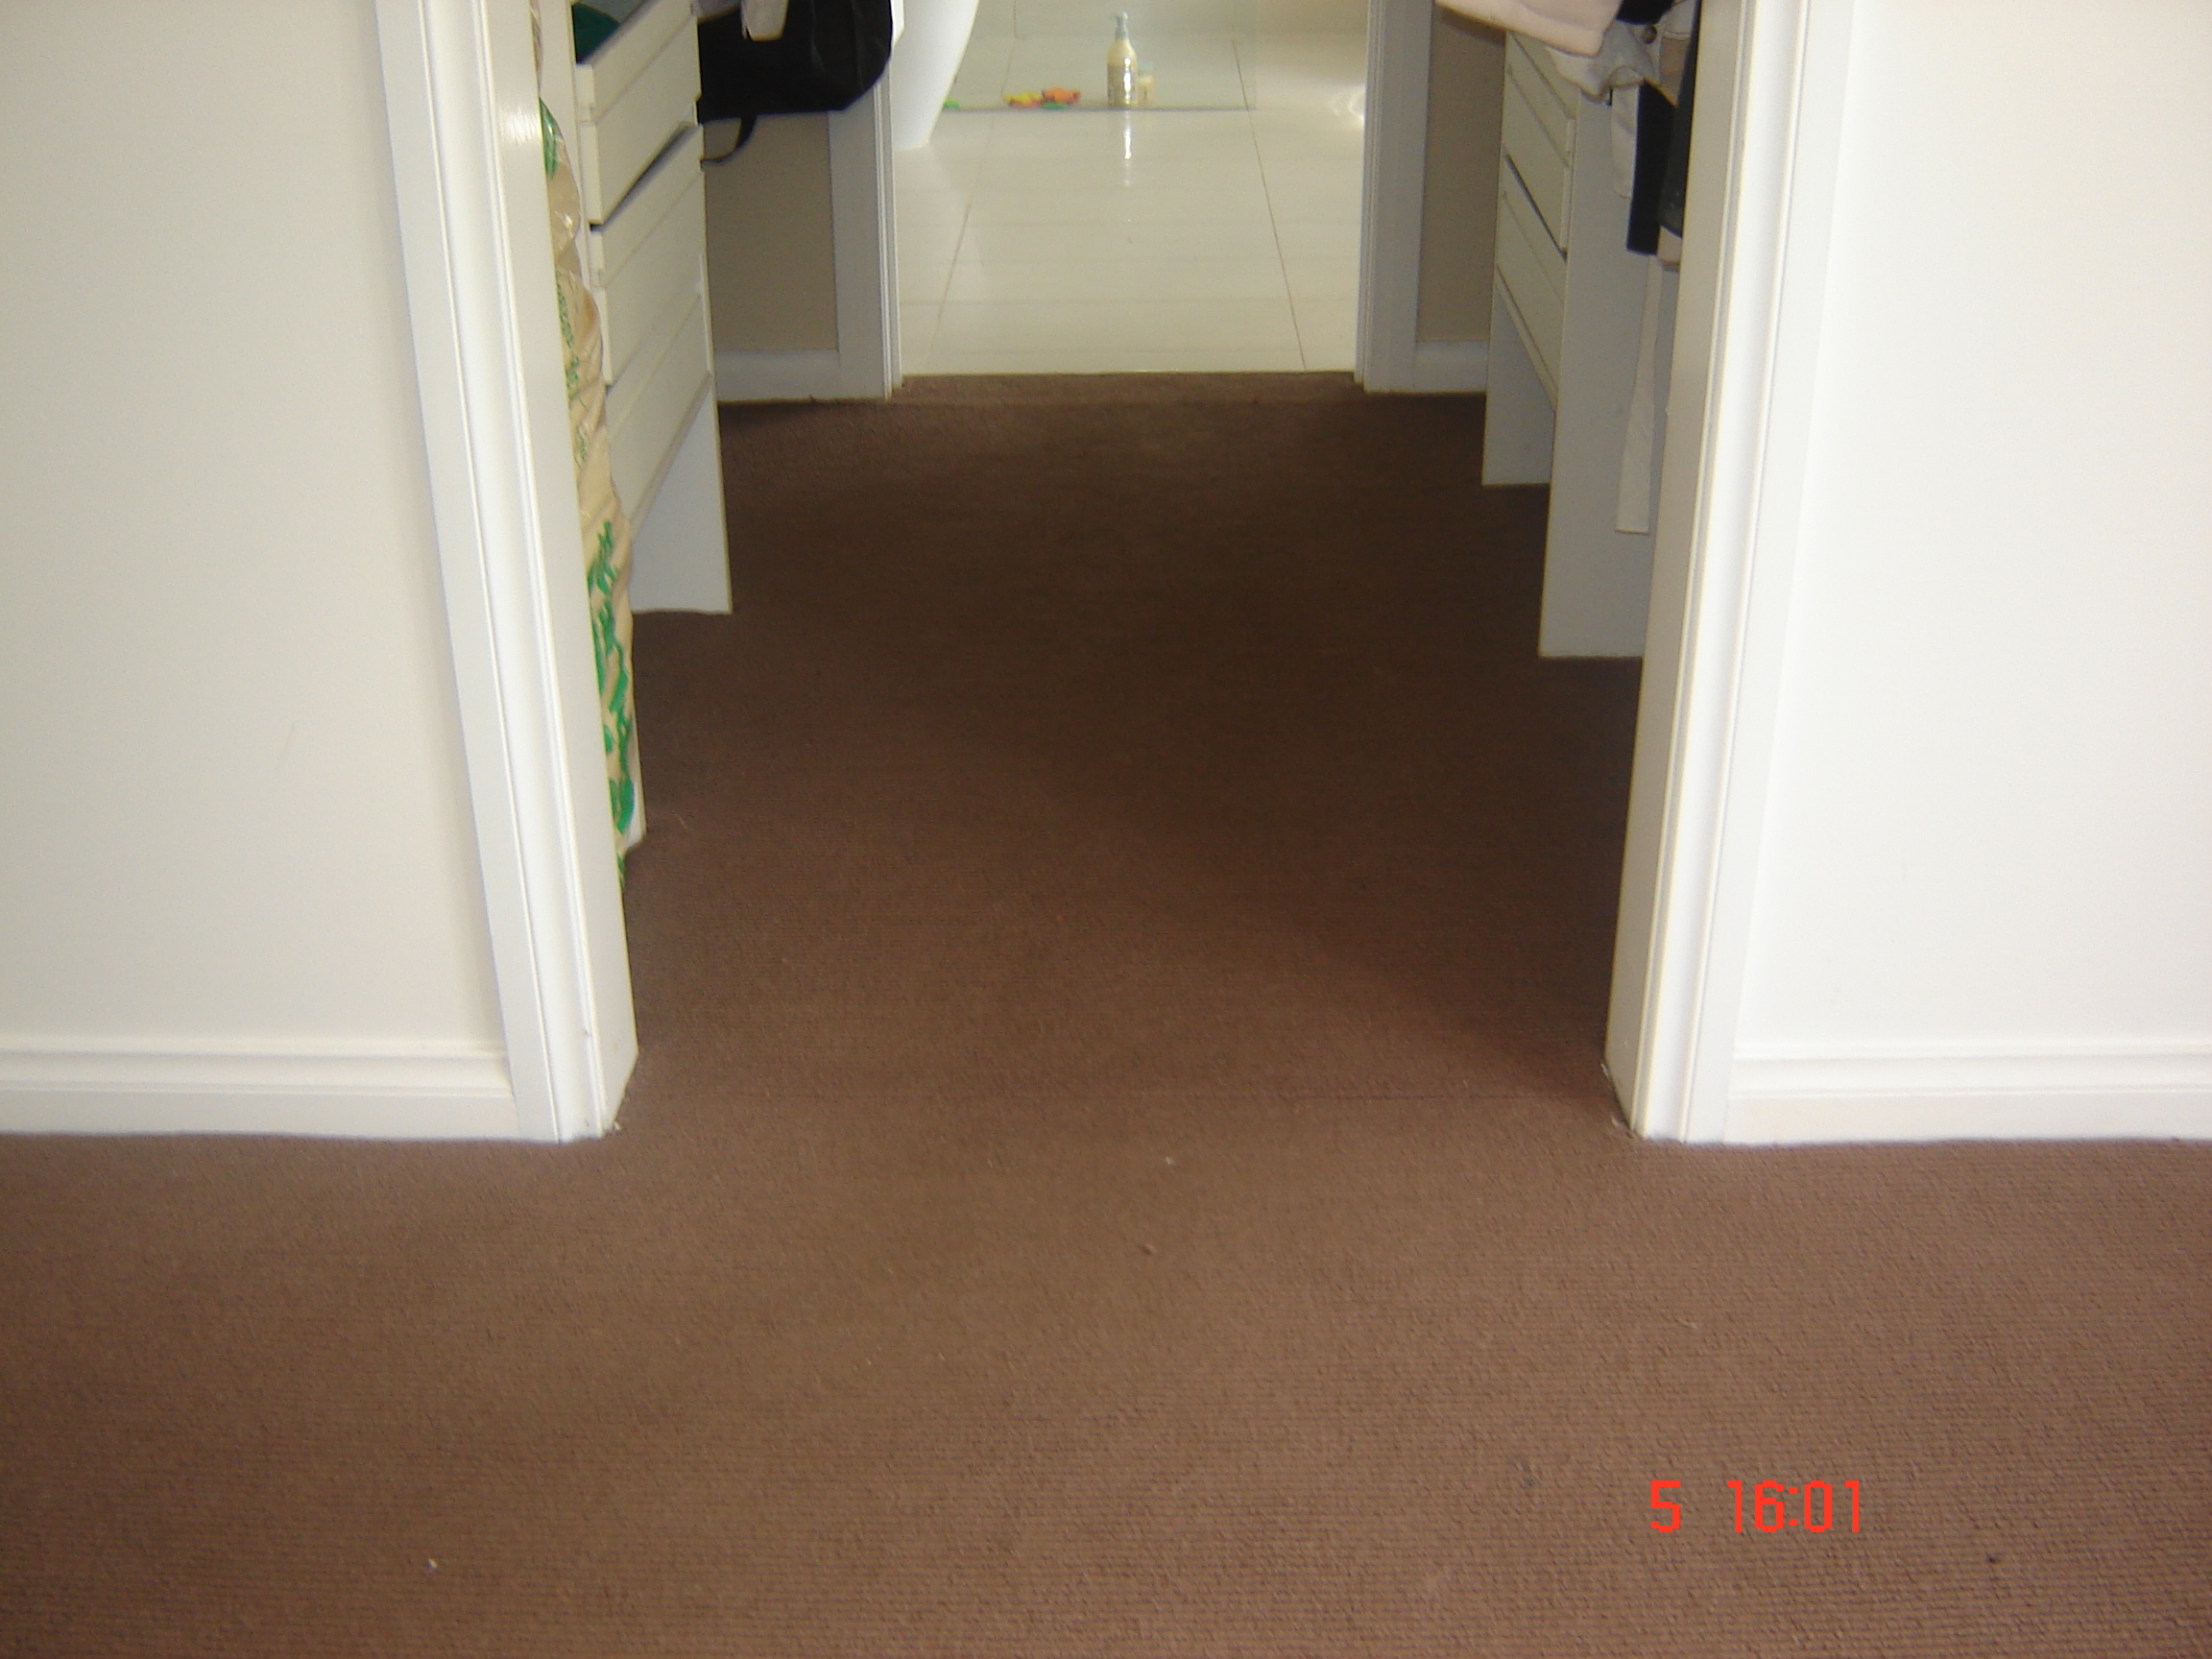 Check Weather Your Flooded Carpet is Properly Dried or not?